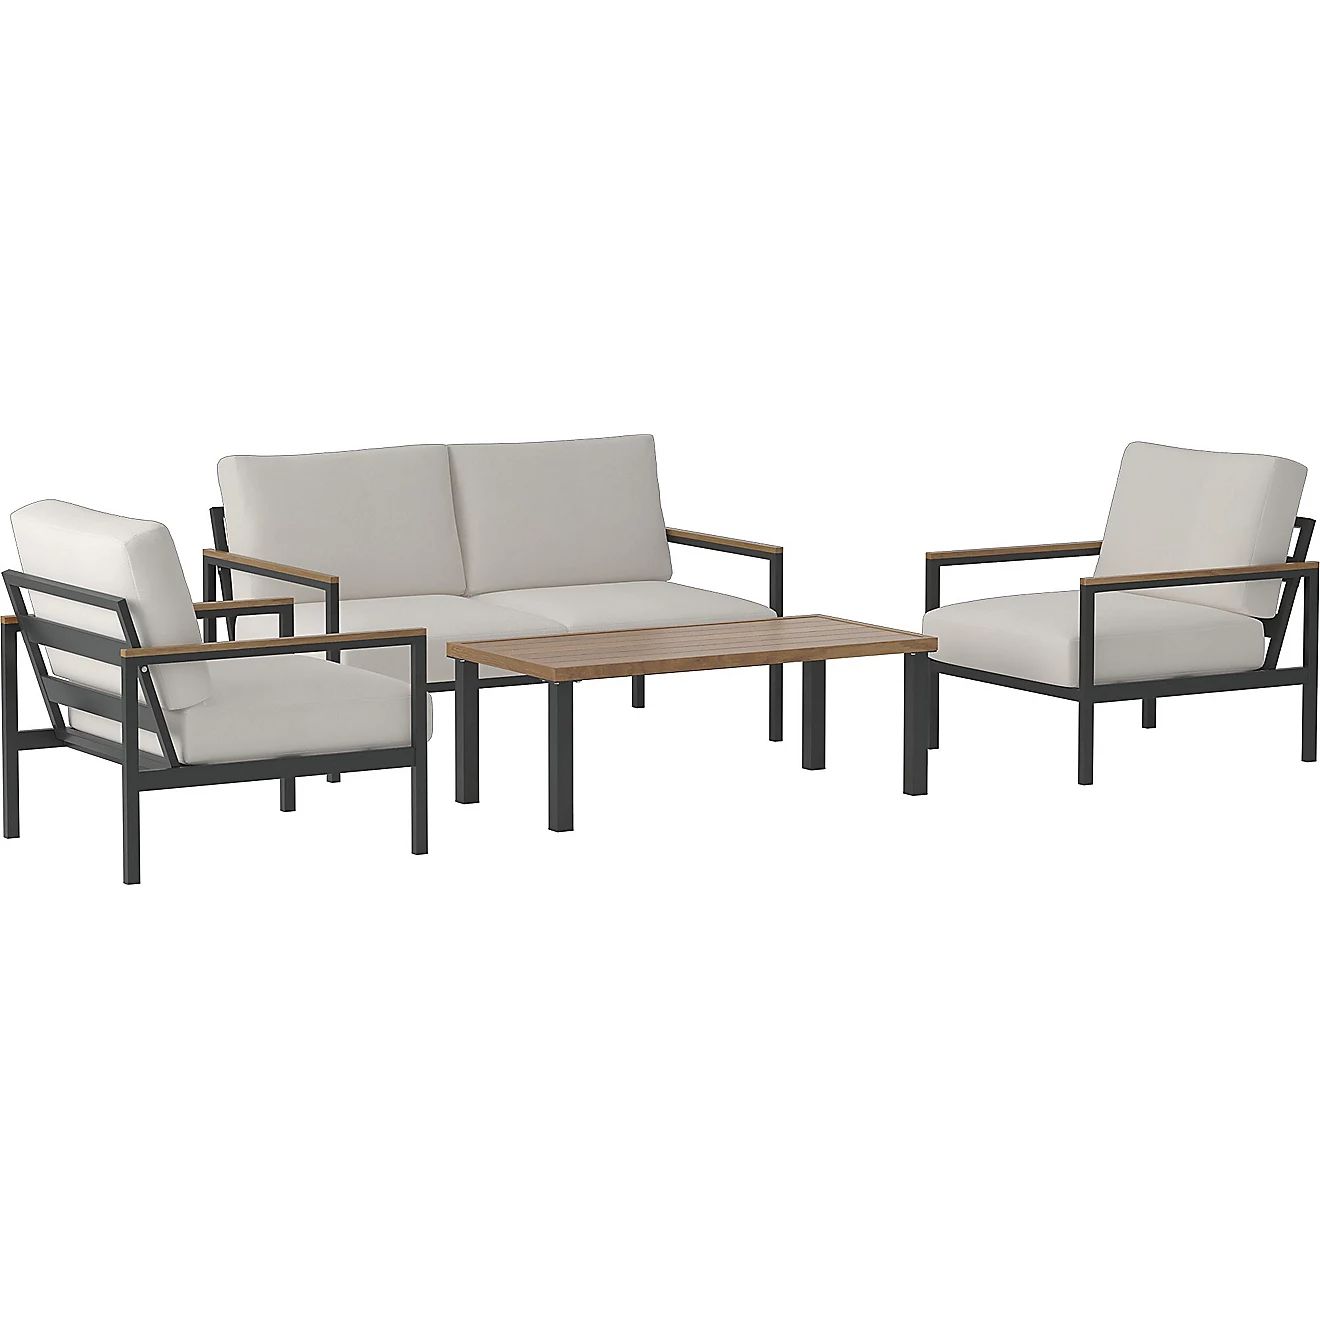 Mosaic 4 Seat Conversation Furniture Set with Cushions | Academy | Academy Sports + Outdoors